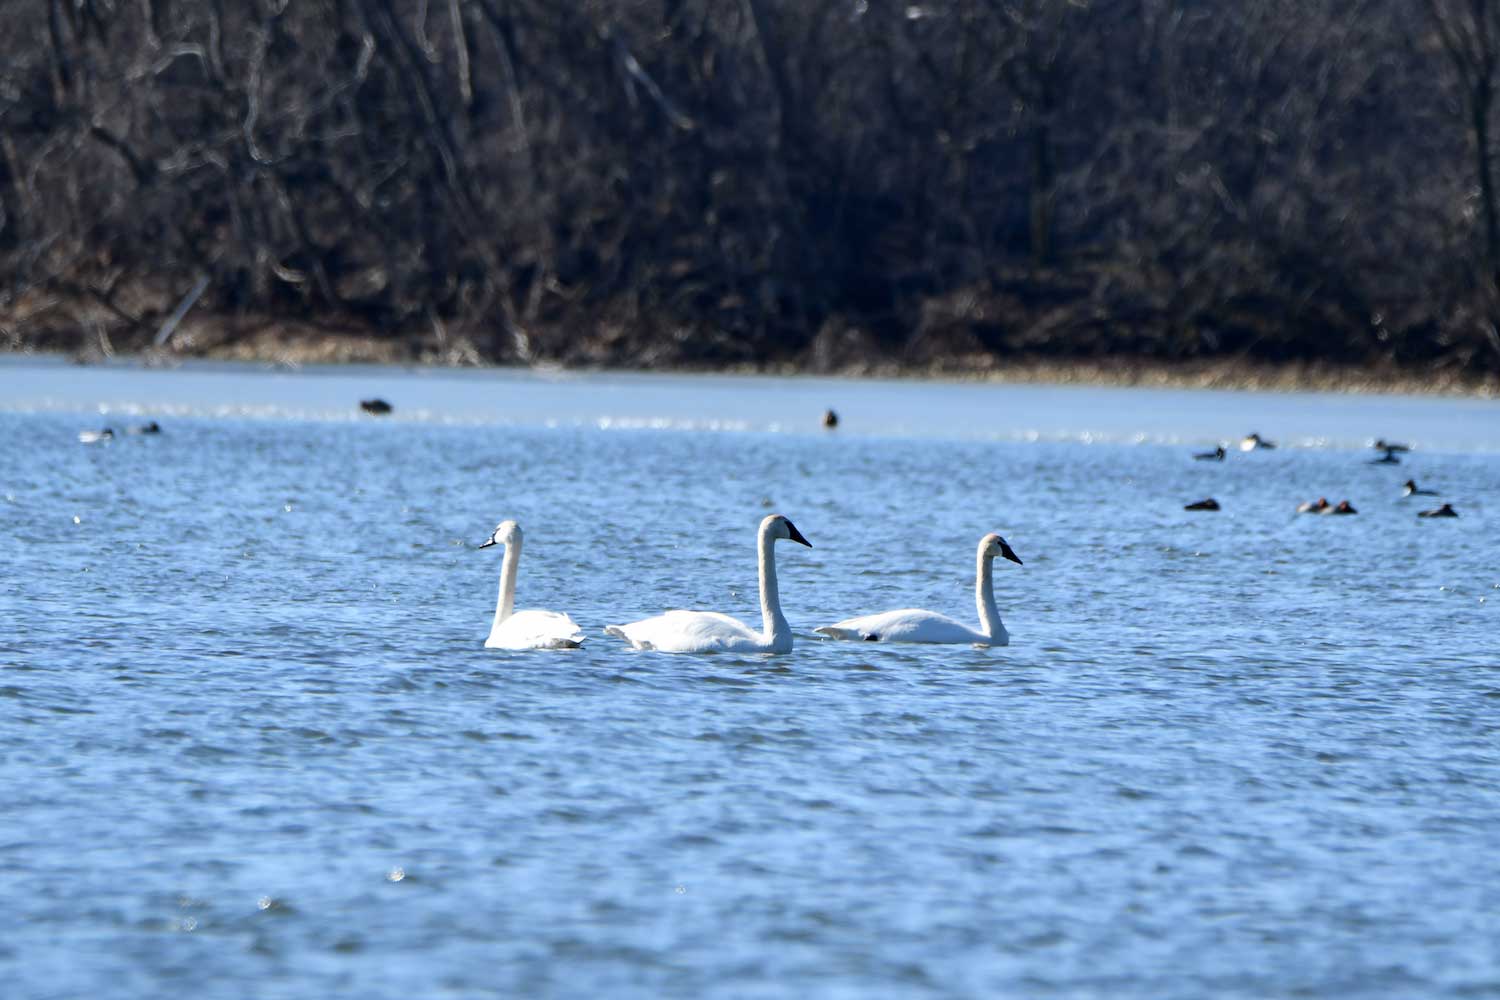 Three trumpeter swans on a lake.